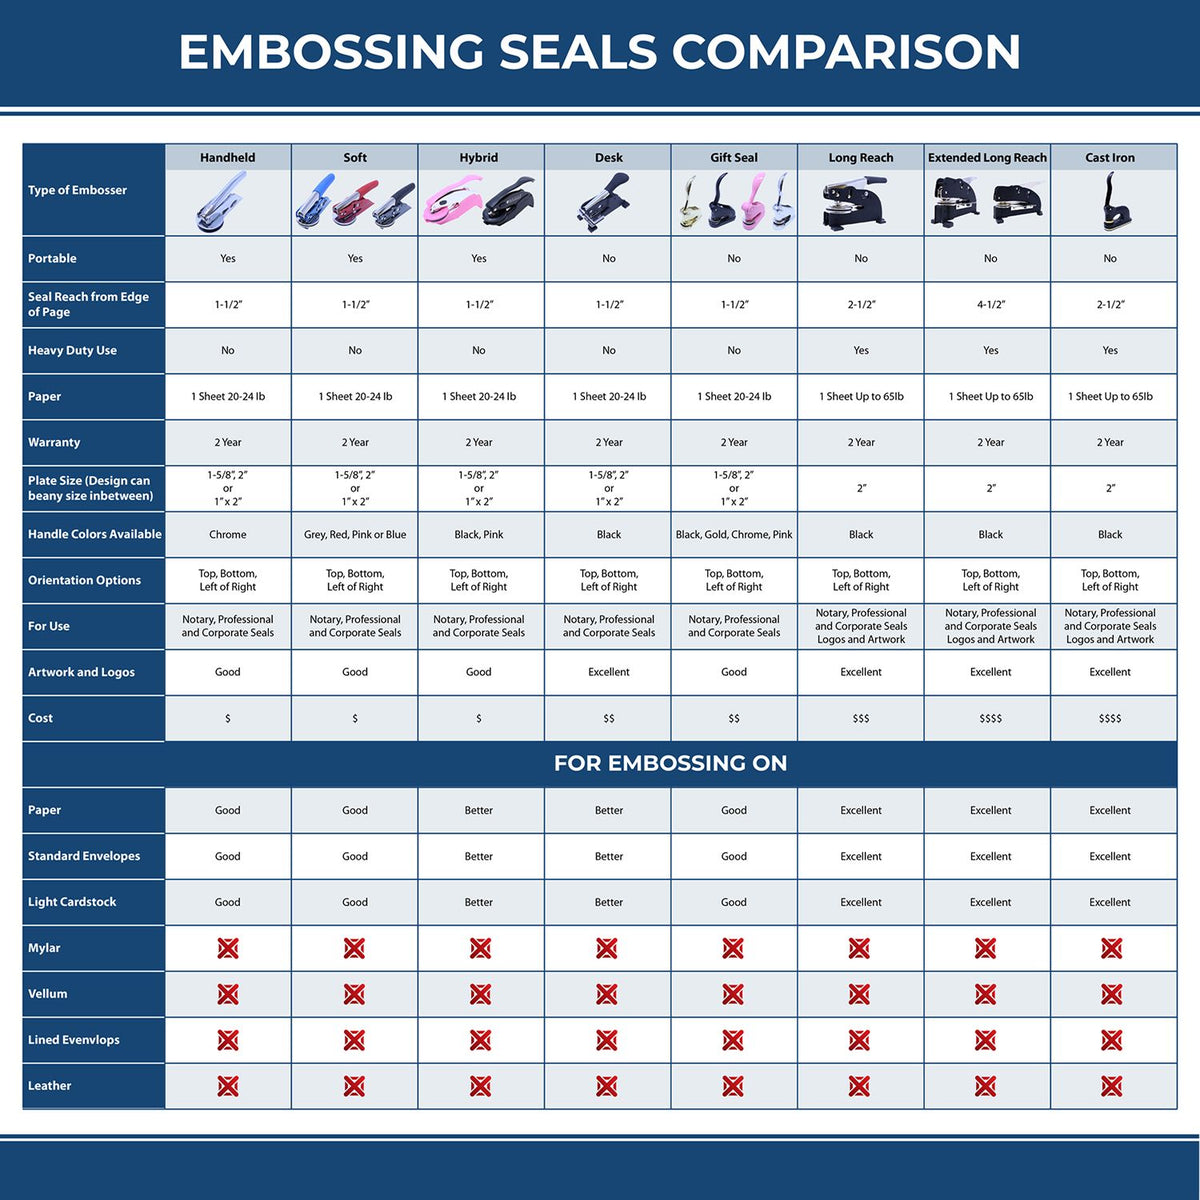 A comparison chart for the different types of mount models available for the Hybrid New Mexico Engineer Seal